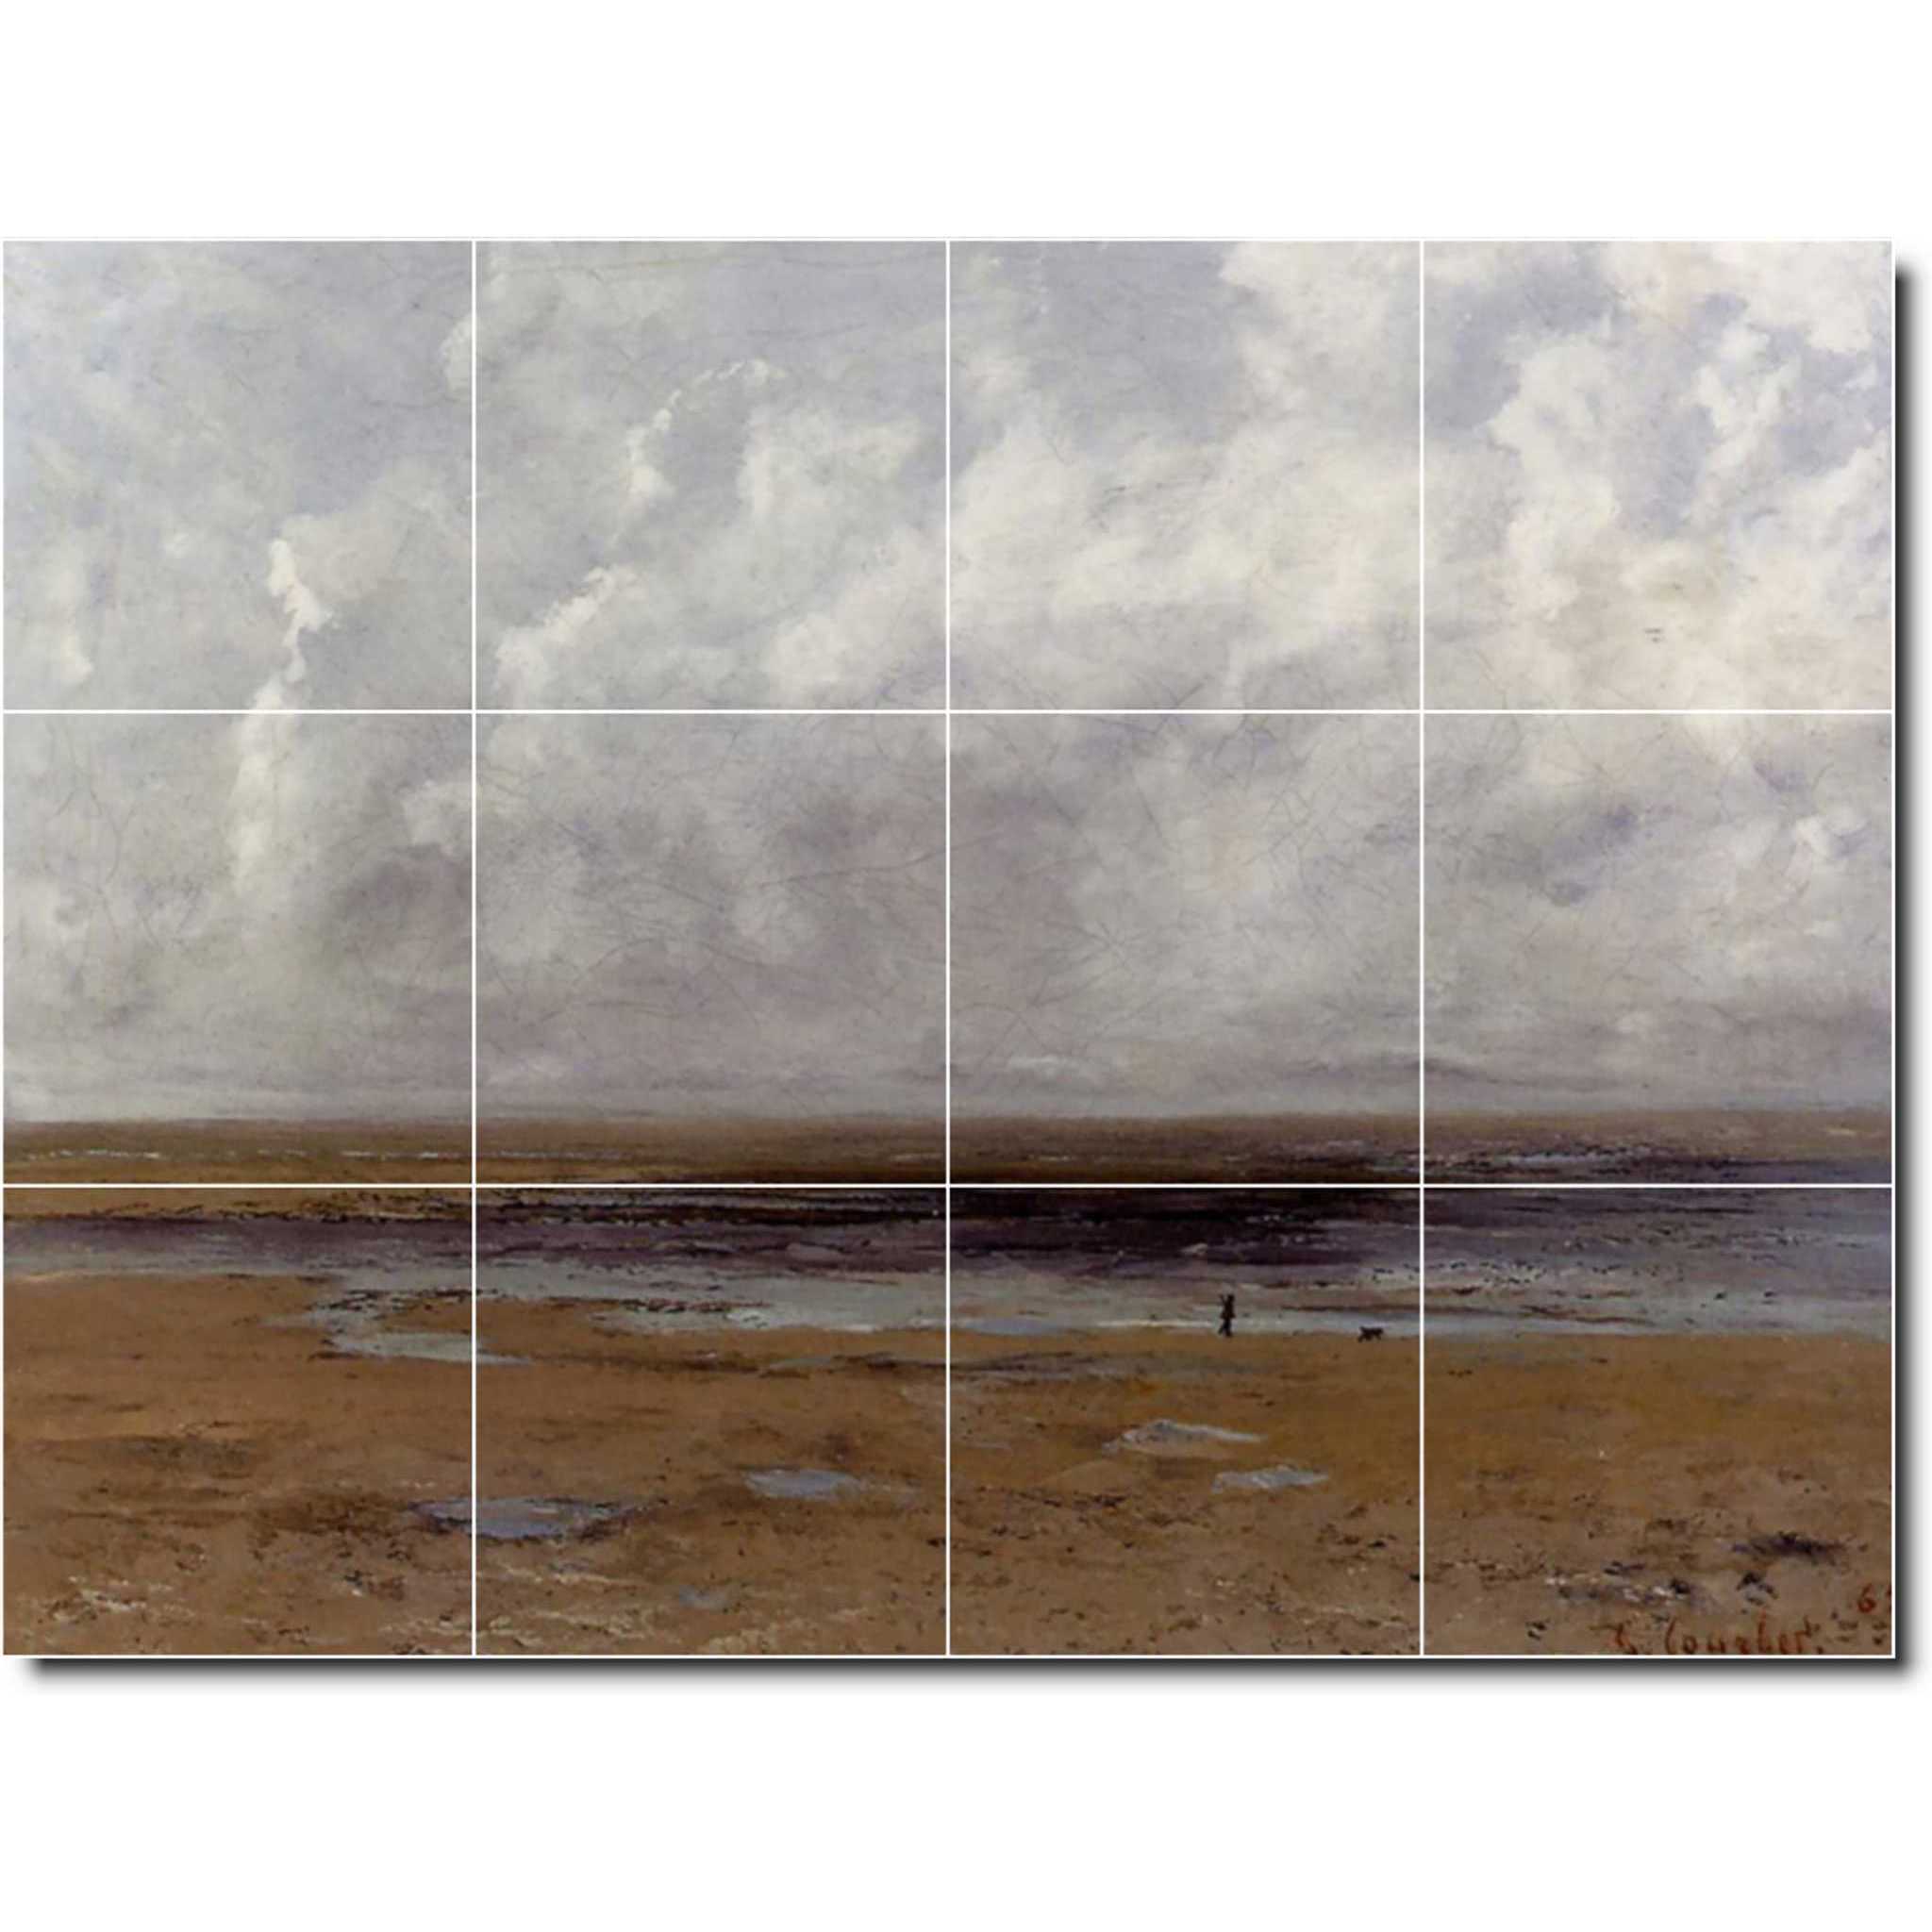 gustave courbet waterfront painting ceramic tile mural p02212